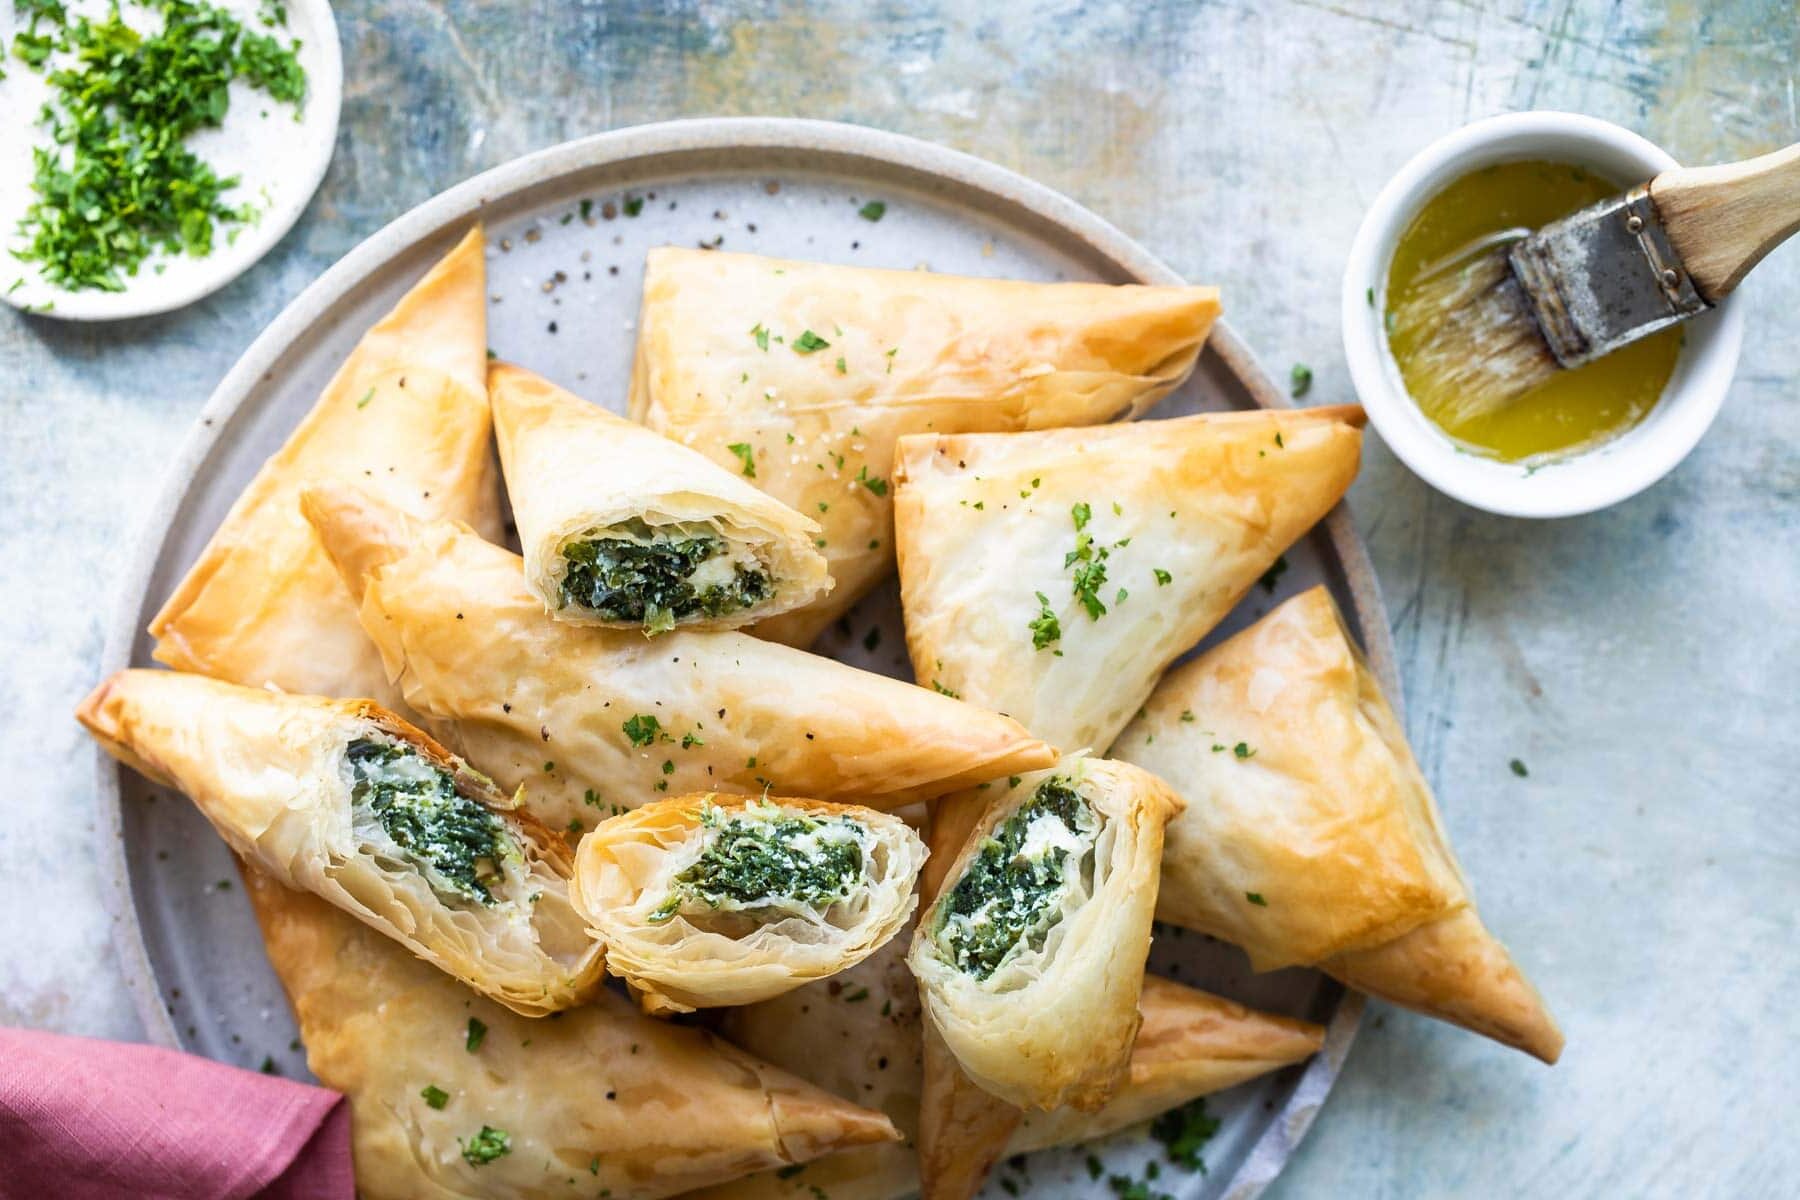 A pile of three cheese spanakopita triangles on a plate.